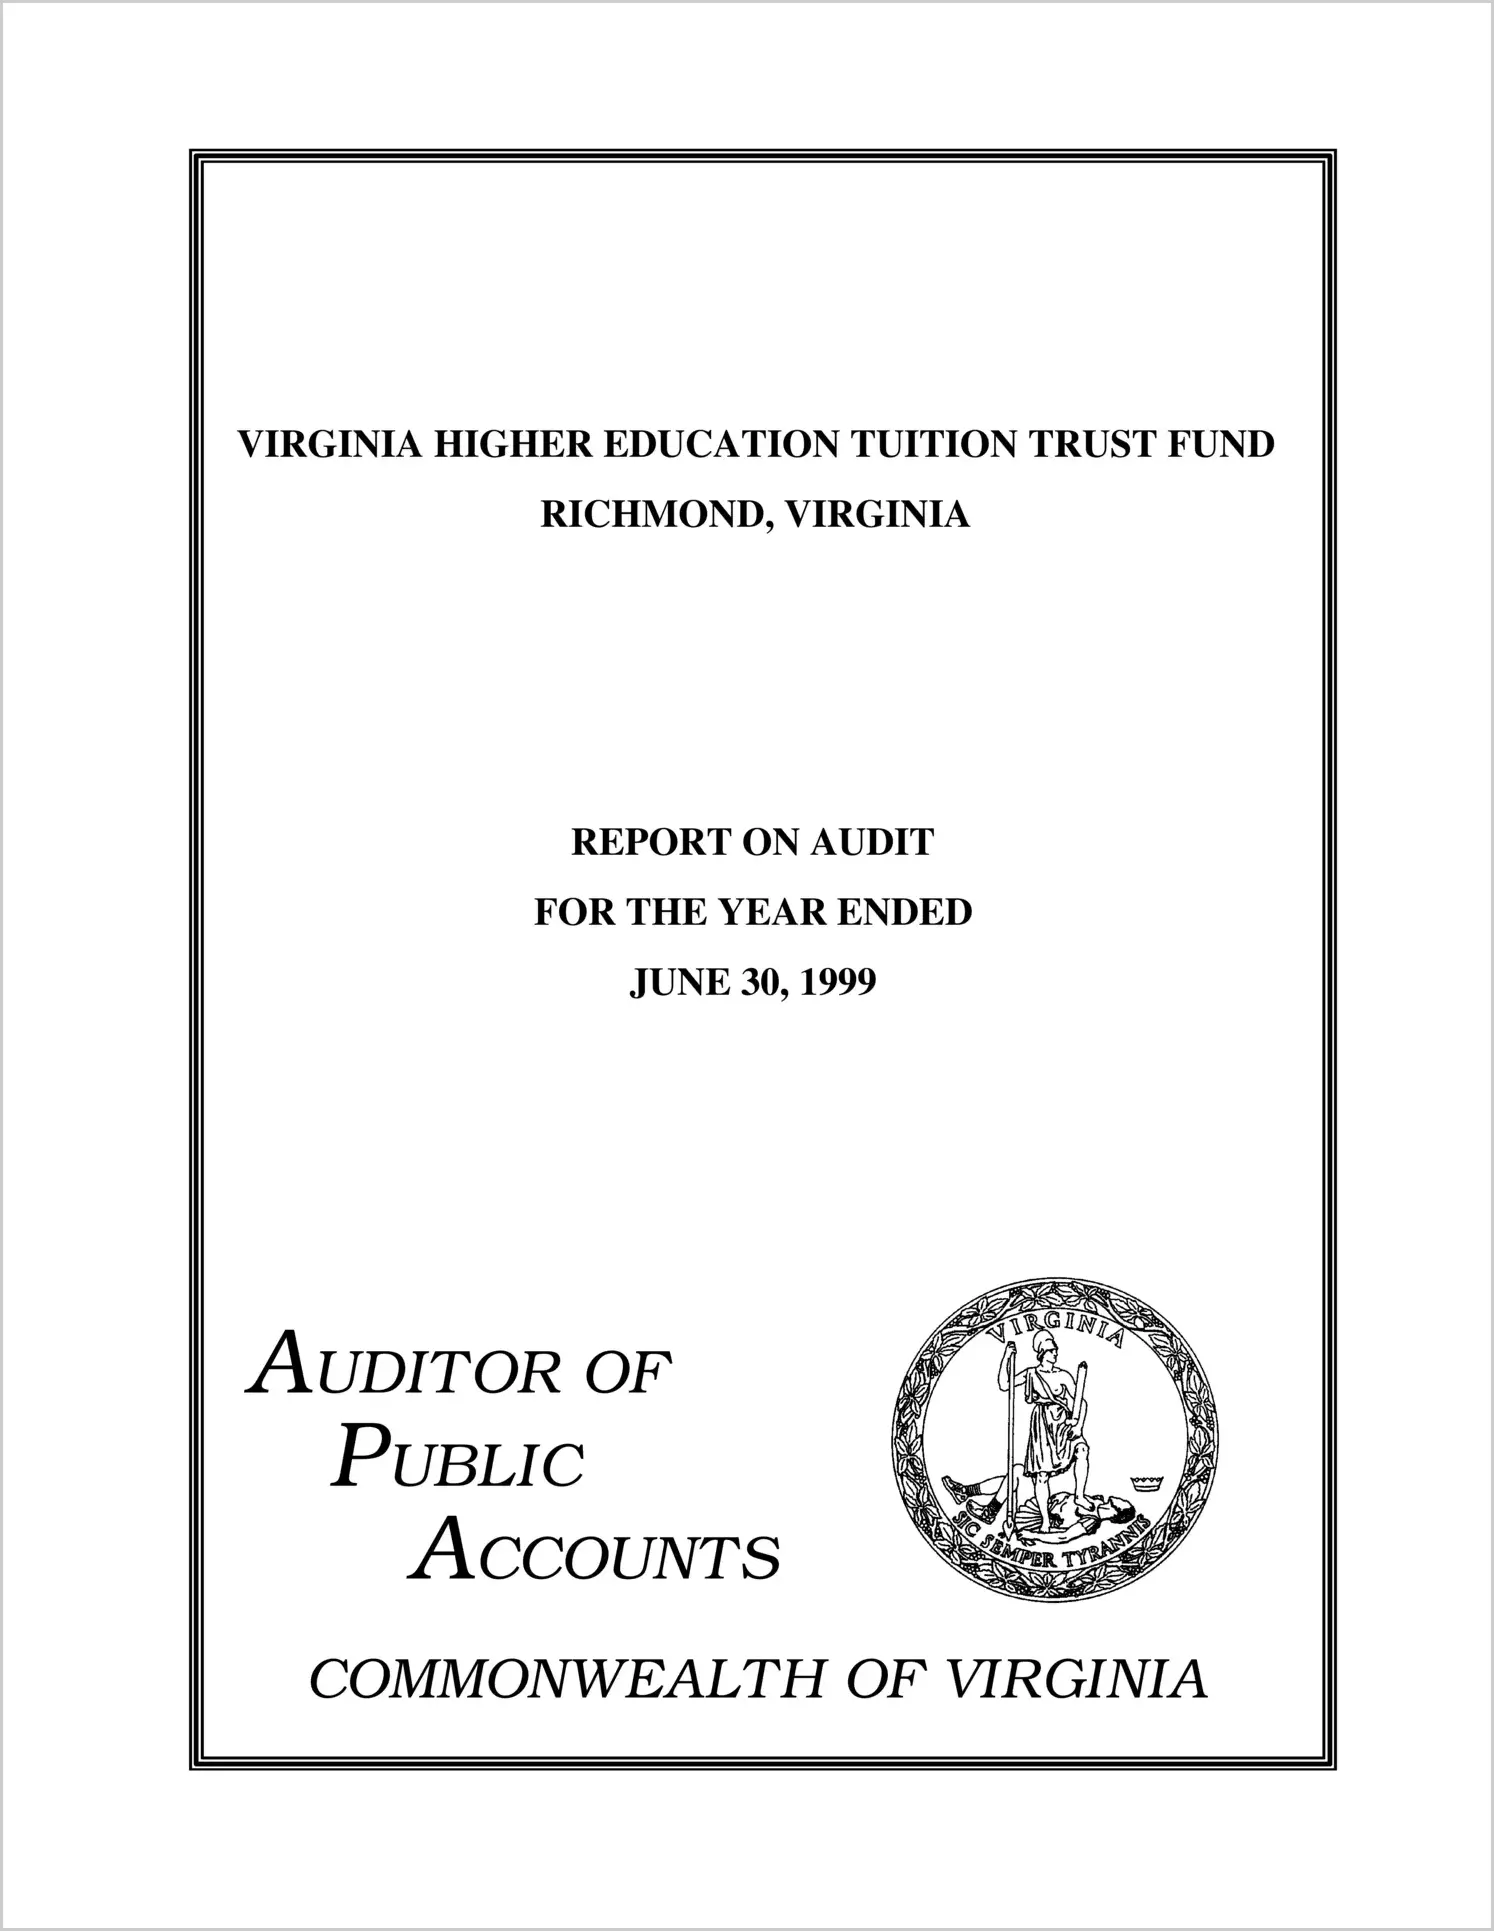 Virginia Higher Education Tuition Trust Fund for the year ended June 30, 1999